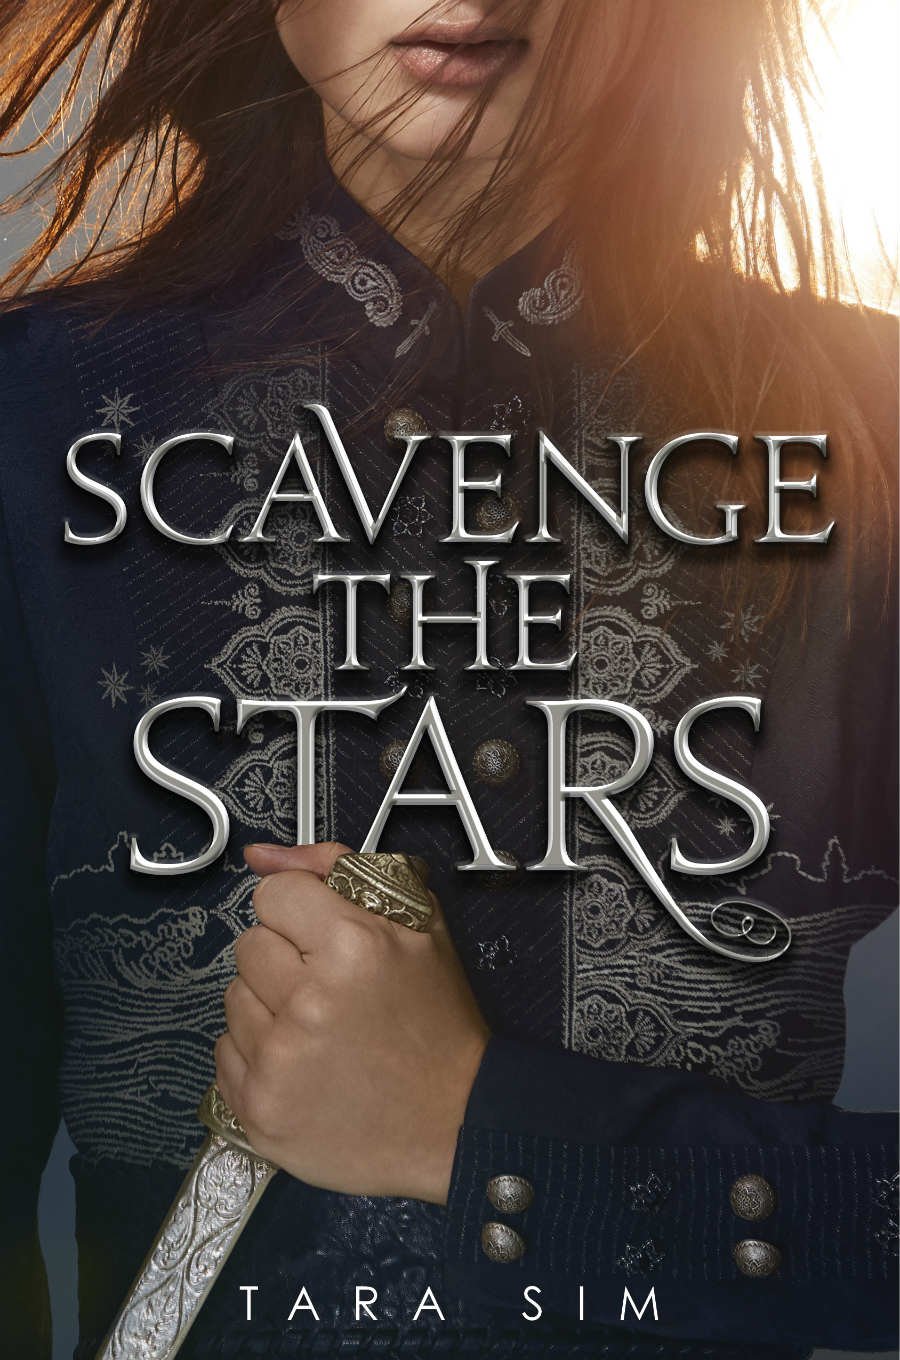 Download Scavenge the stars book 2 For Free